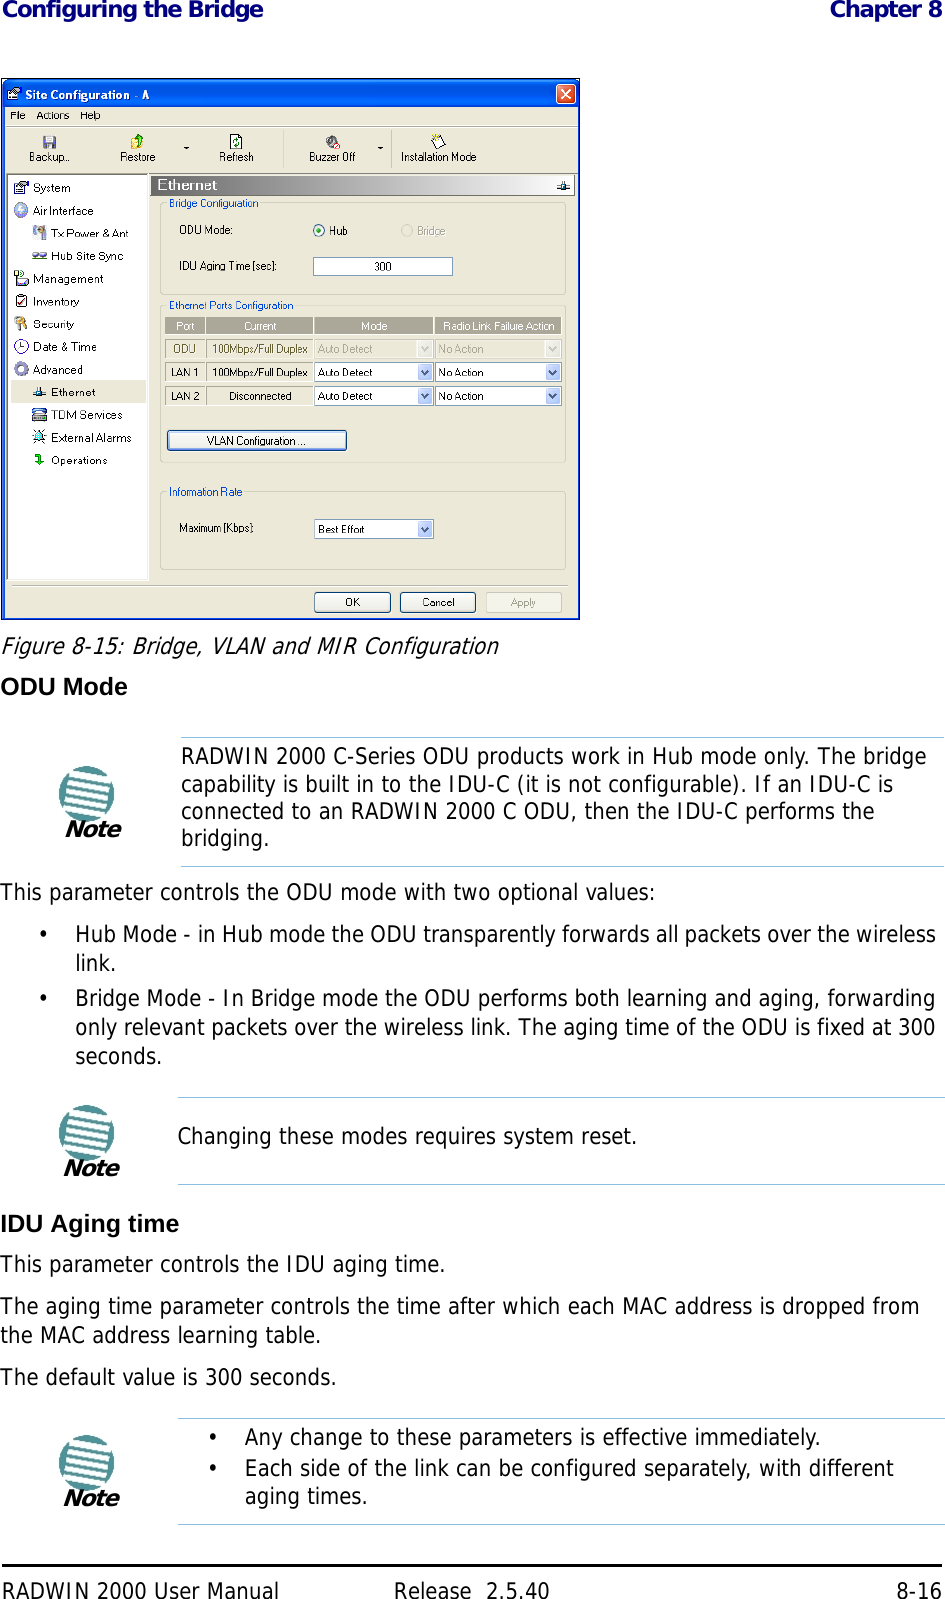 Configuring the Bridge Chapter 8RADWIN 2000 User Manual Release  2.5.40 8-16Figure 8-15: Bridge, VLAN and MIR ConfigurationODU ModeThis parameter controls the ODU mode with two optional values:• Hub Mode - in Hub mode the ODU transparently forwards all packets over the wireless link.• Bridge Mode - In Bridge mode the ODU performs both learning and aging, forwarding only relevant packets over the wireless link. The aging time of the ODU is fixed at 300 seconds.IDU Aging timeThis parameter controls the IDU aging time.The aging time parameter controls the time after which each MAC address is dropped from the MAC address learning table.The default value is 300 seconds.NoteRADWIN 2000 C-Series ODU products work in Hub mode only. The bridge capability is built in to the IDU-C (it is not configurable). If an IDU-C is connected to an RADWIN 2000 C ODU, then the IDU-C performs the bridging.NoteChanging these modes requires system reset.Note• Any change to these parameters is effective immediately.• Each side of the link can be configured separately, with different aging times.